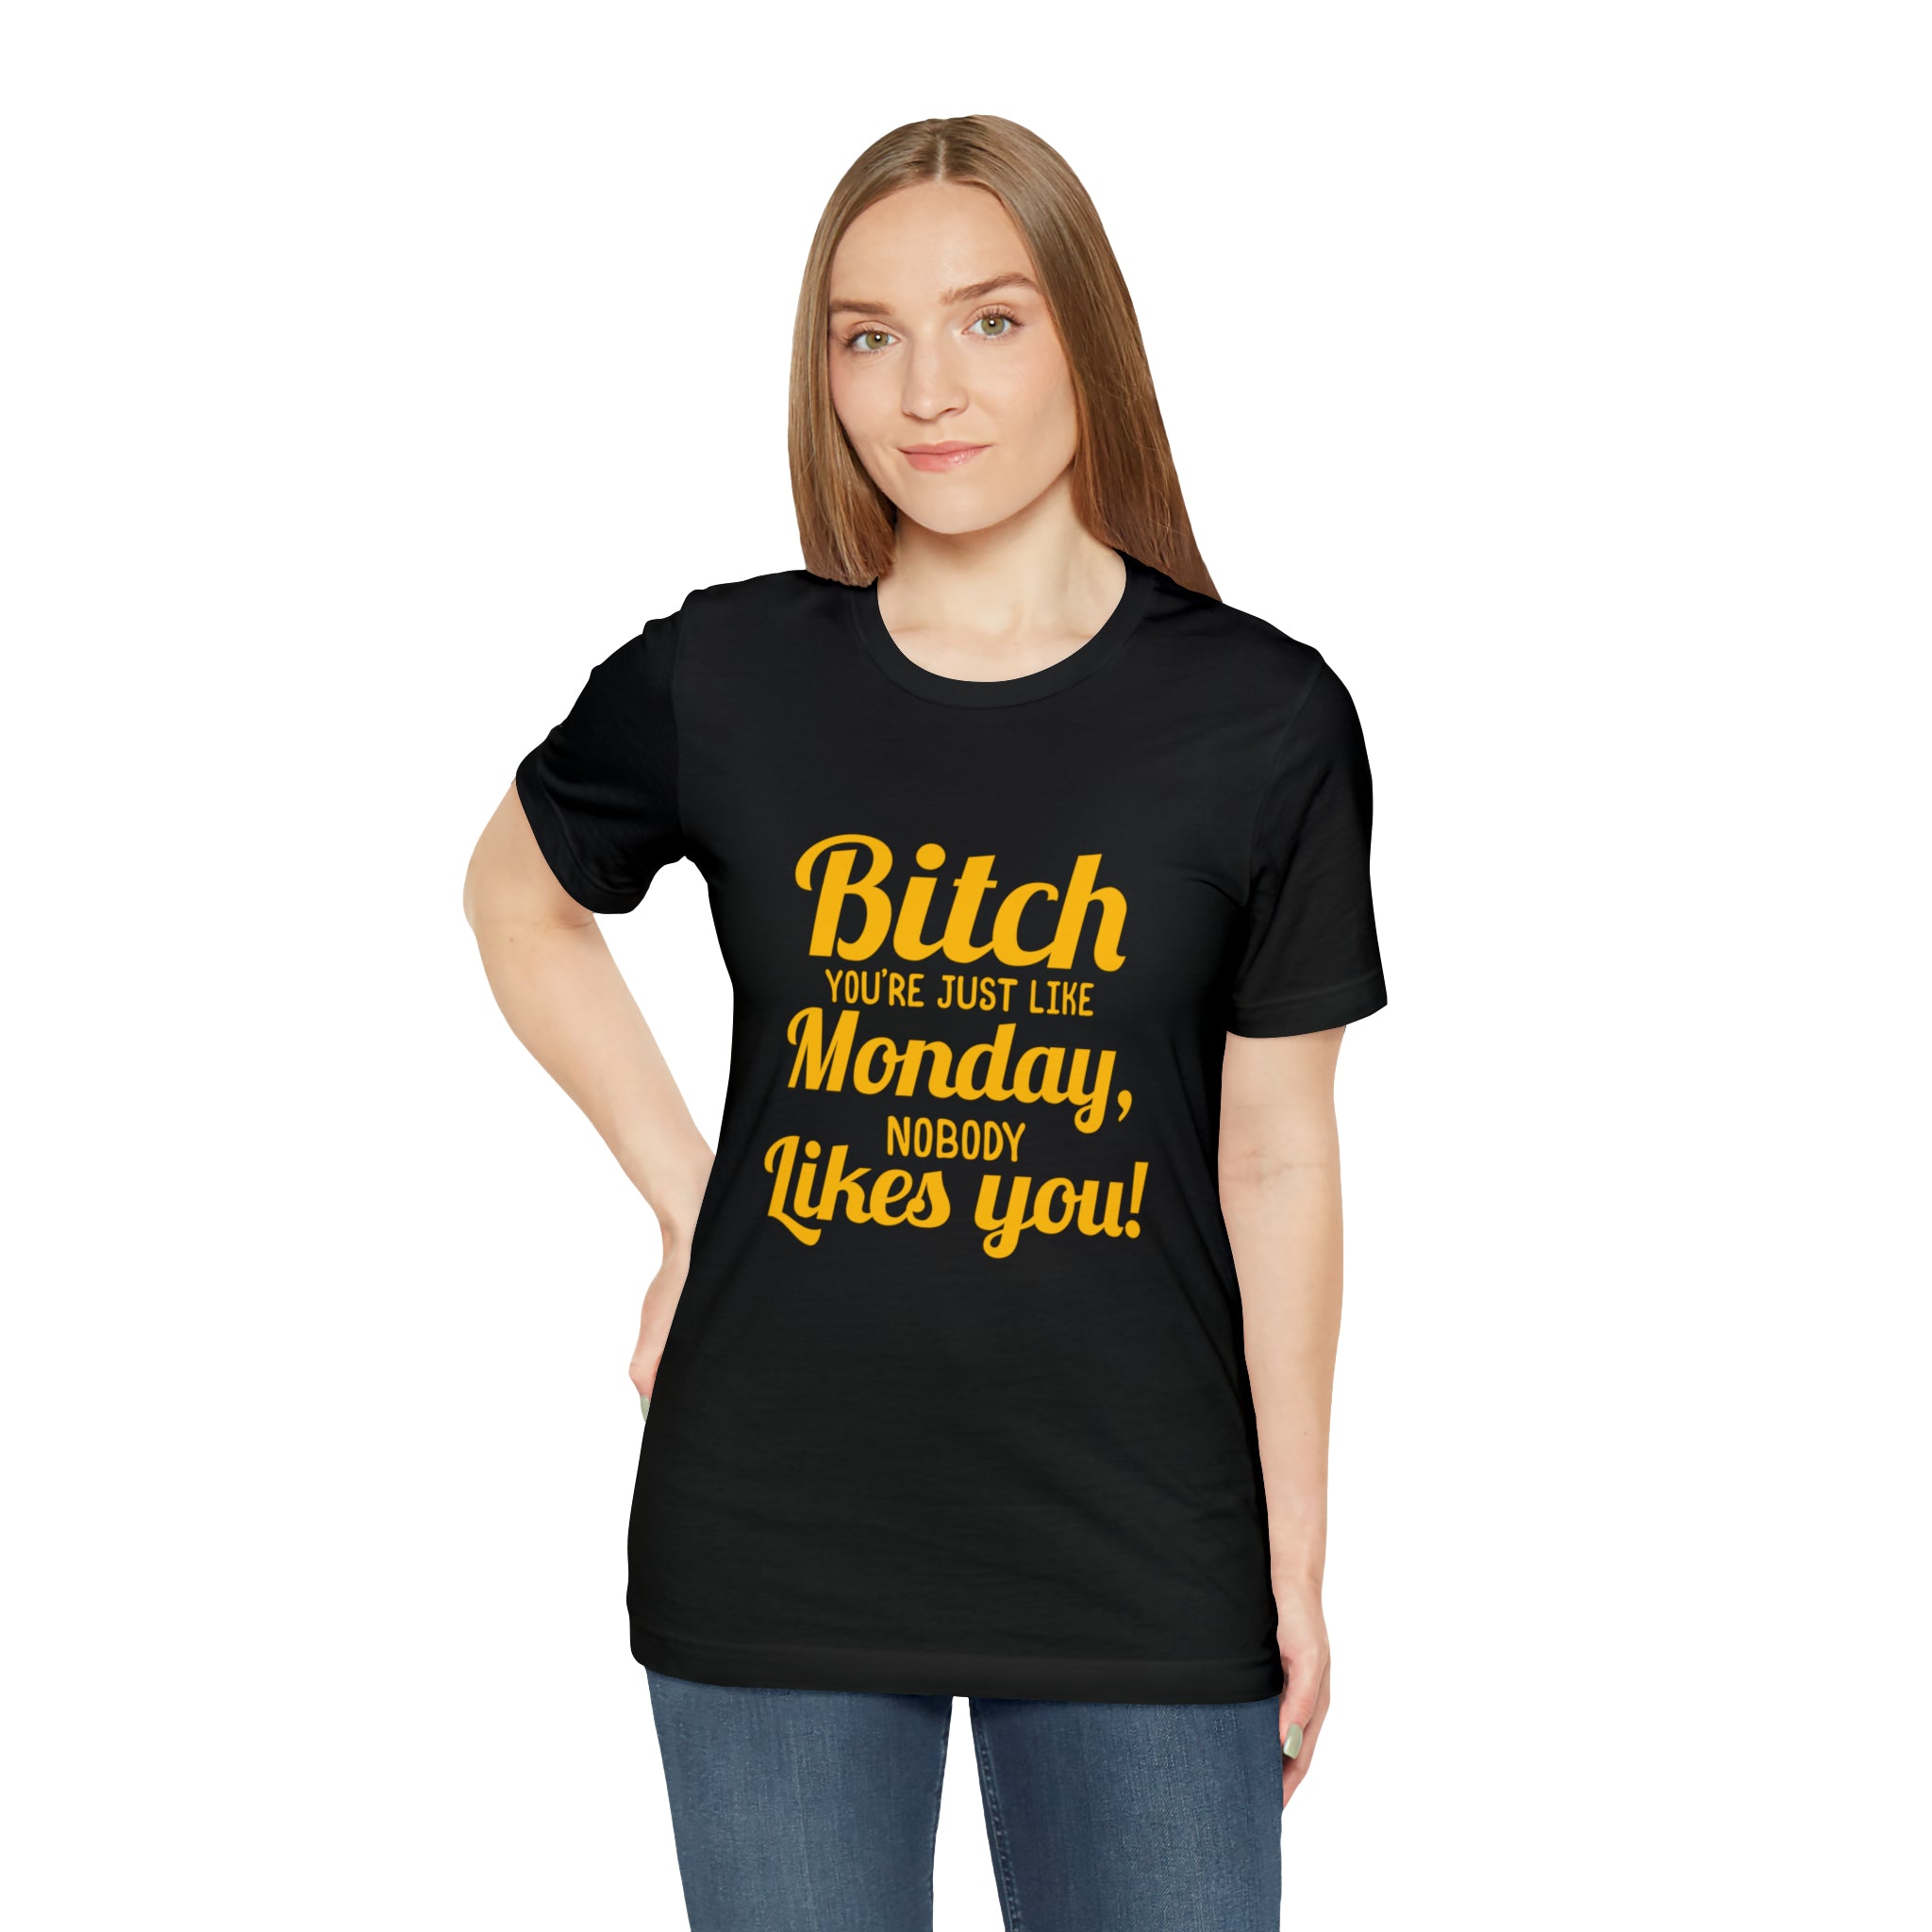 Style Bitch you are just like Monday nobody likes you unisex t-shirt.